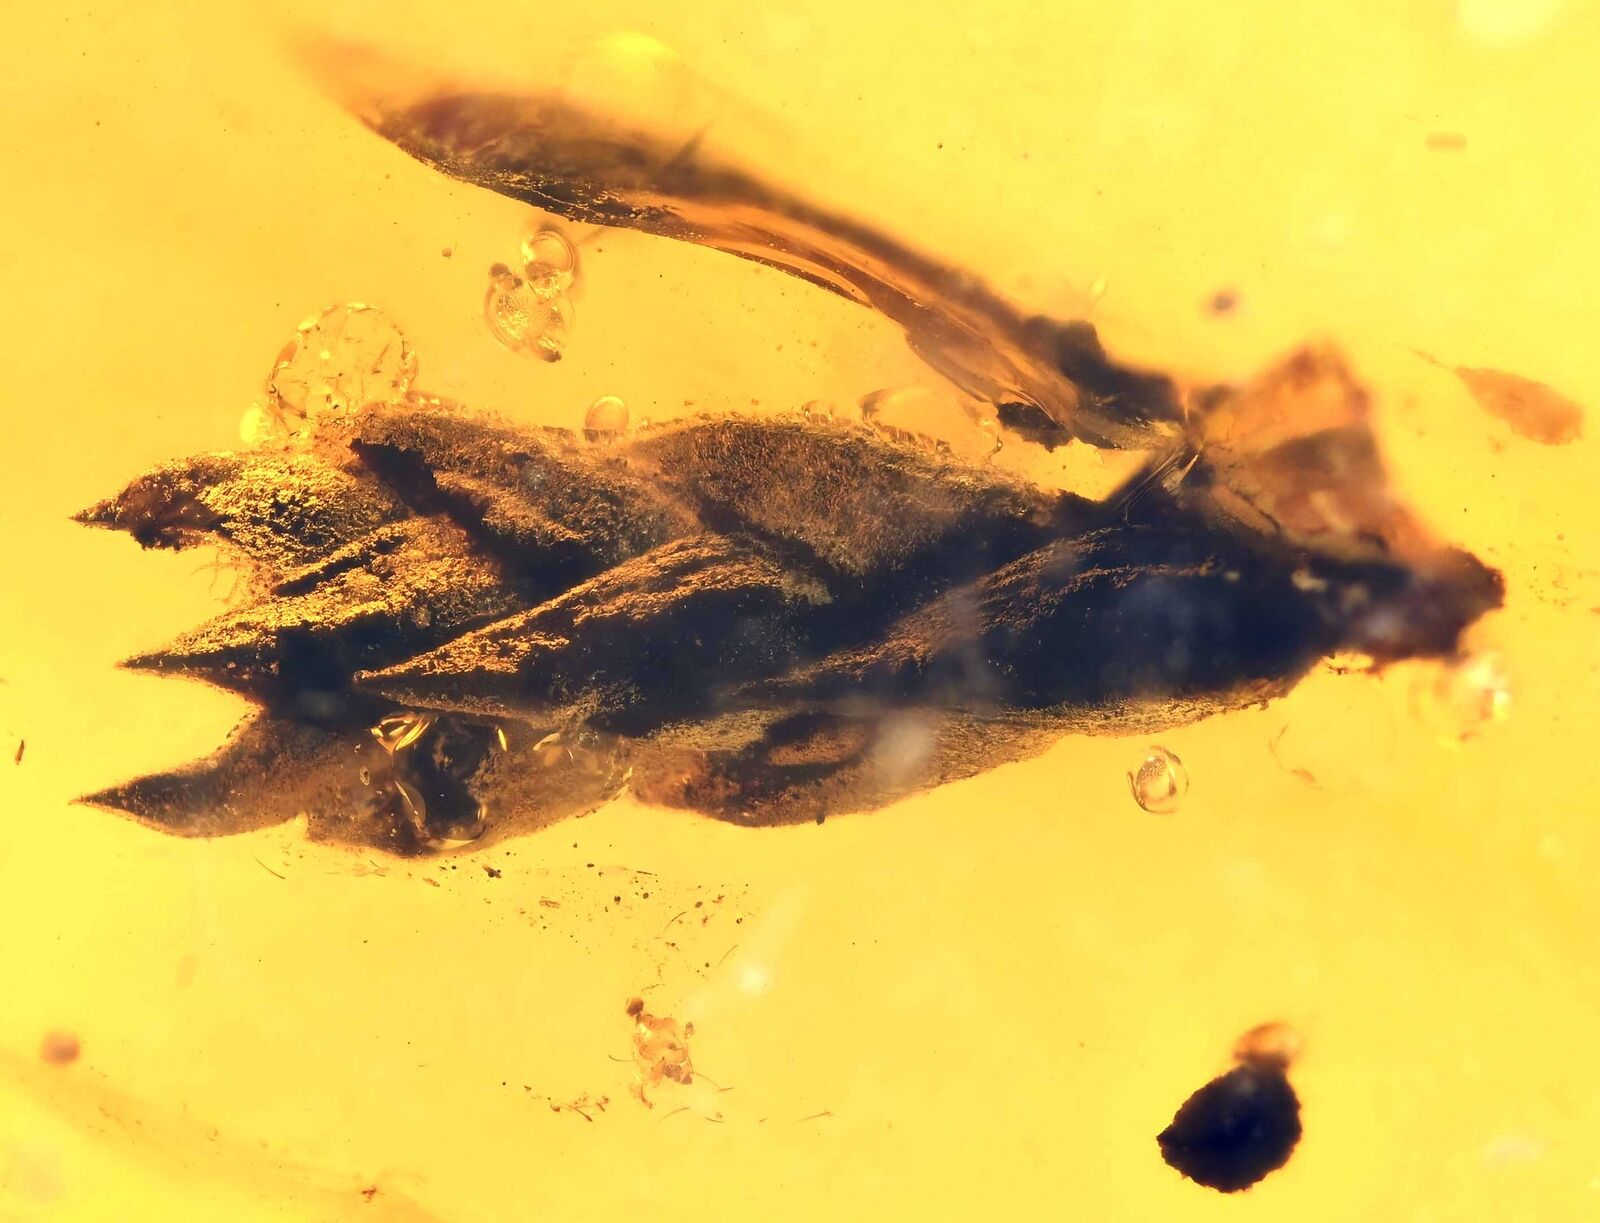 Interesting Leaf Botanical plant, Fossil inclusion in Burmese Amber